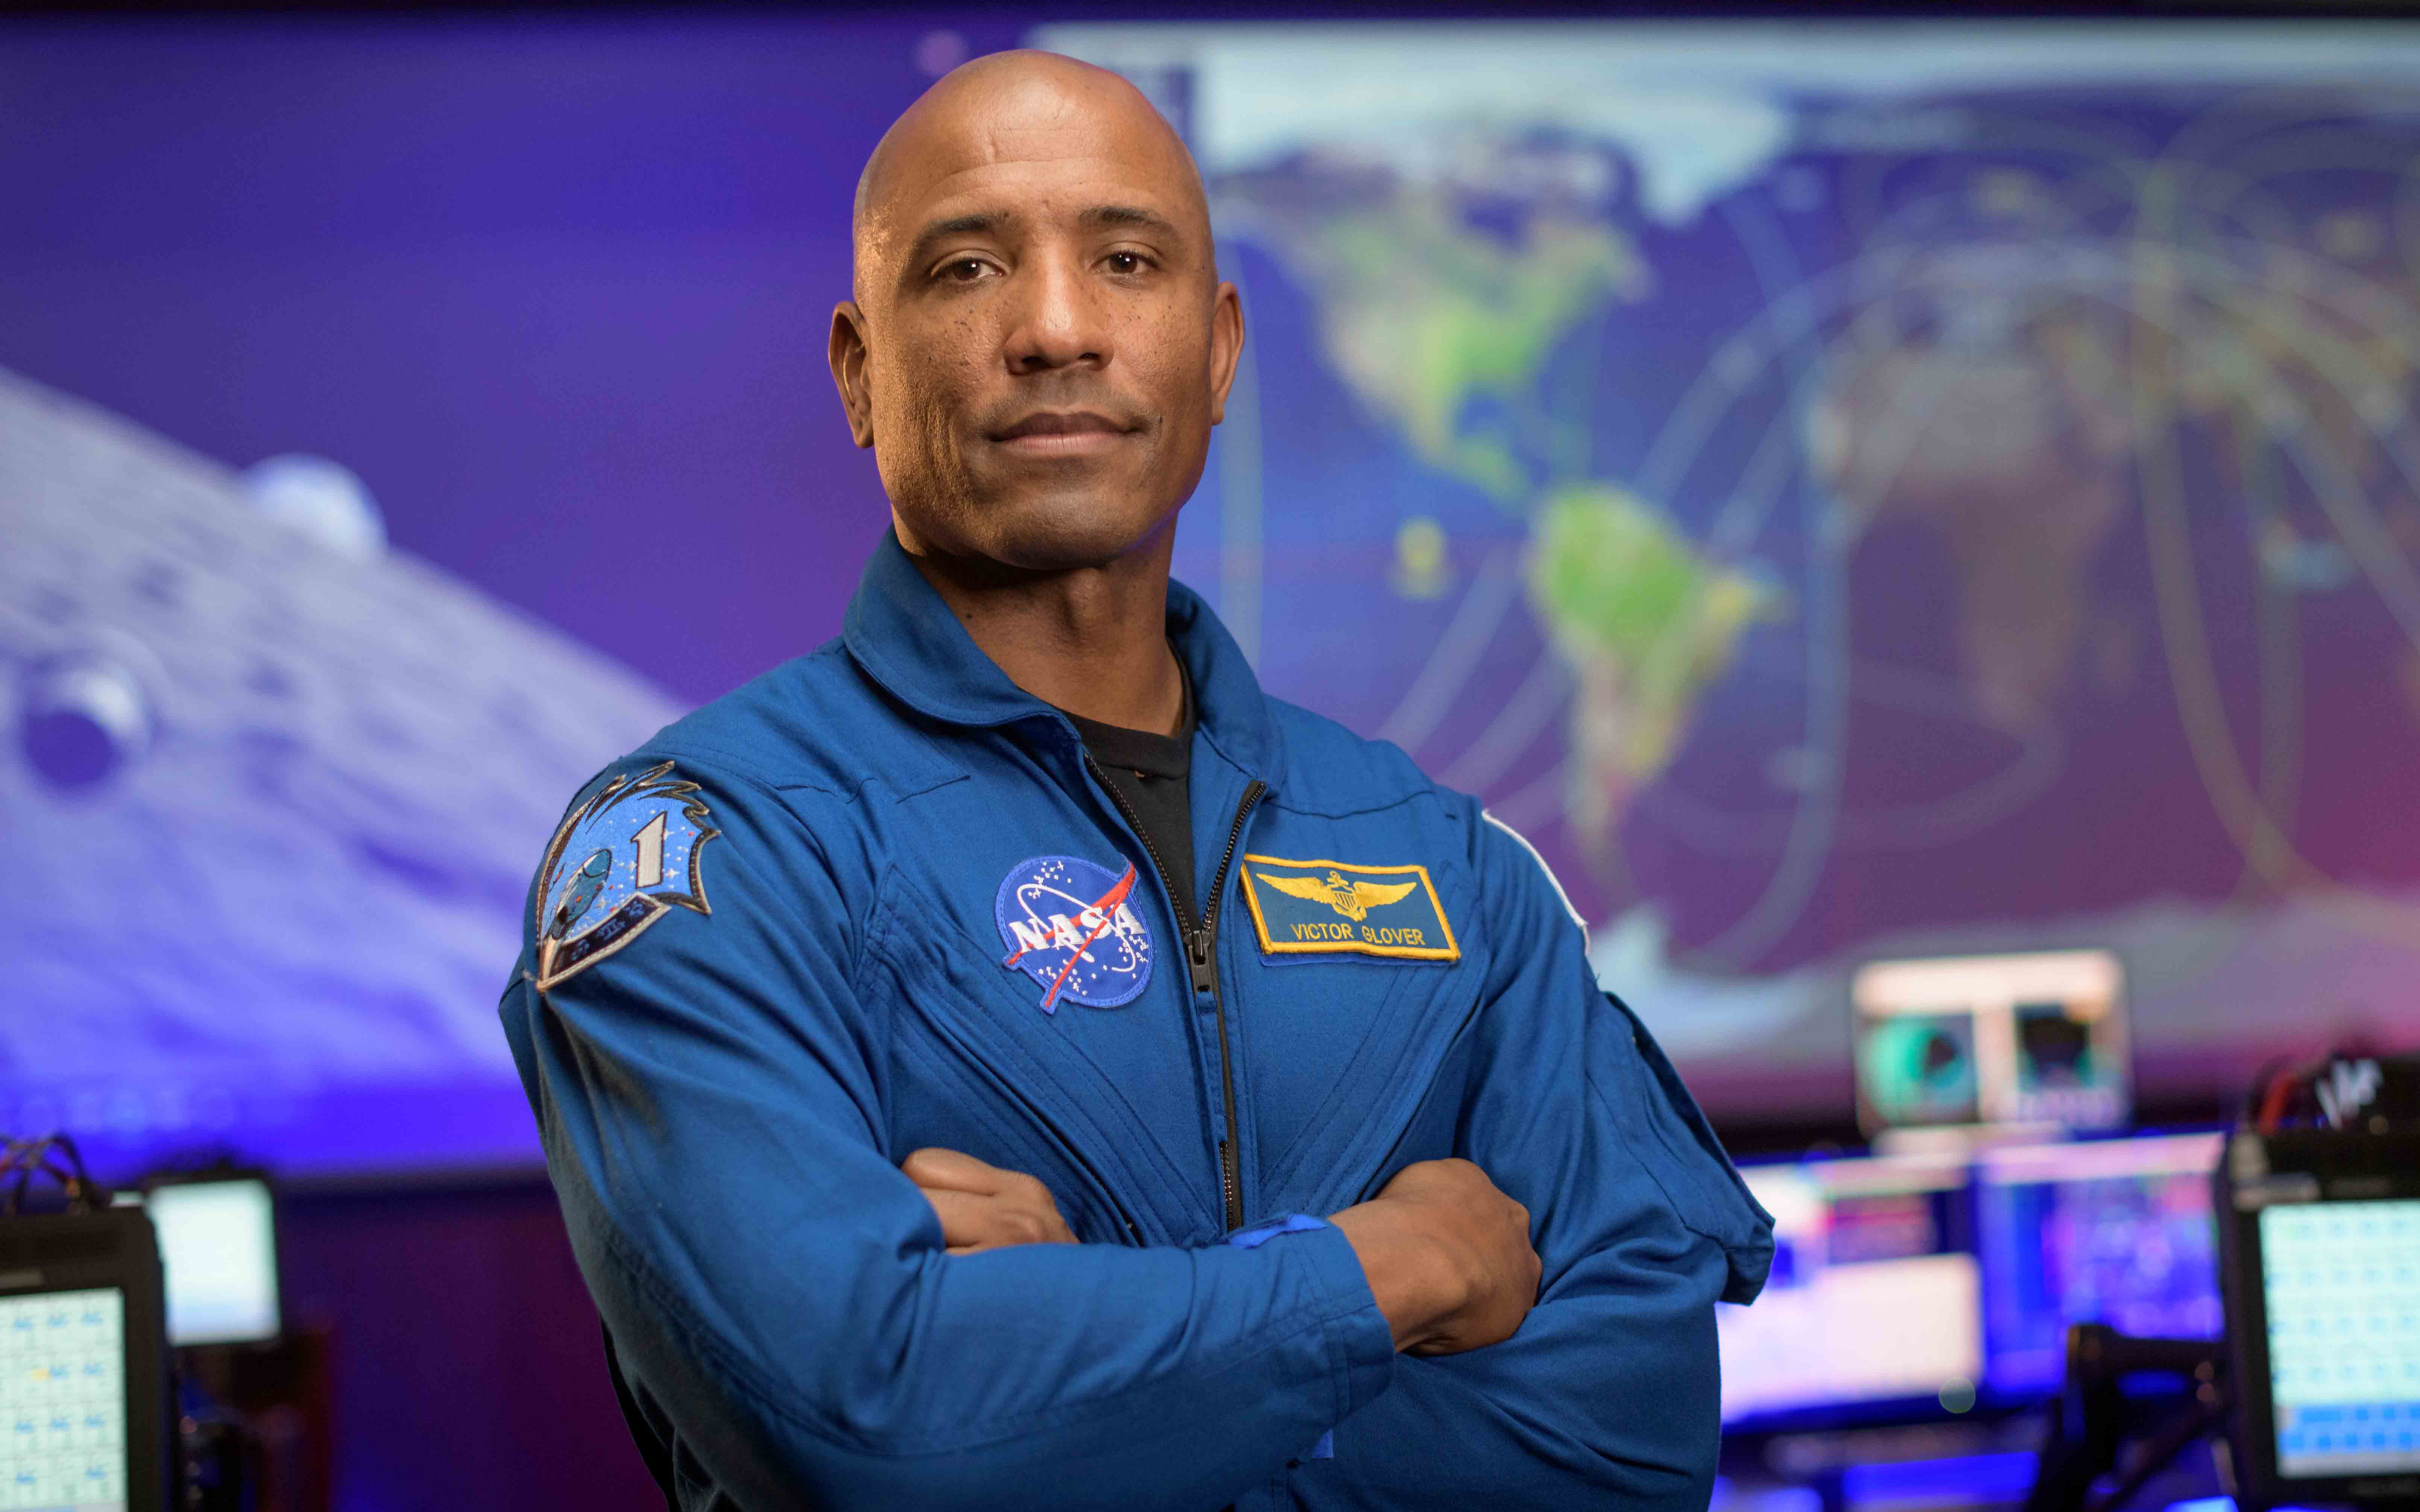 Alumnus Victor Glover wears a blue NASA flight suit and crosses his arms as he poses for a portrait.